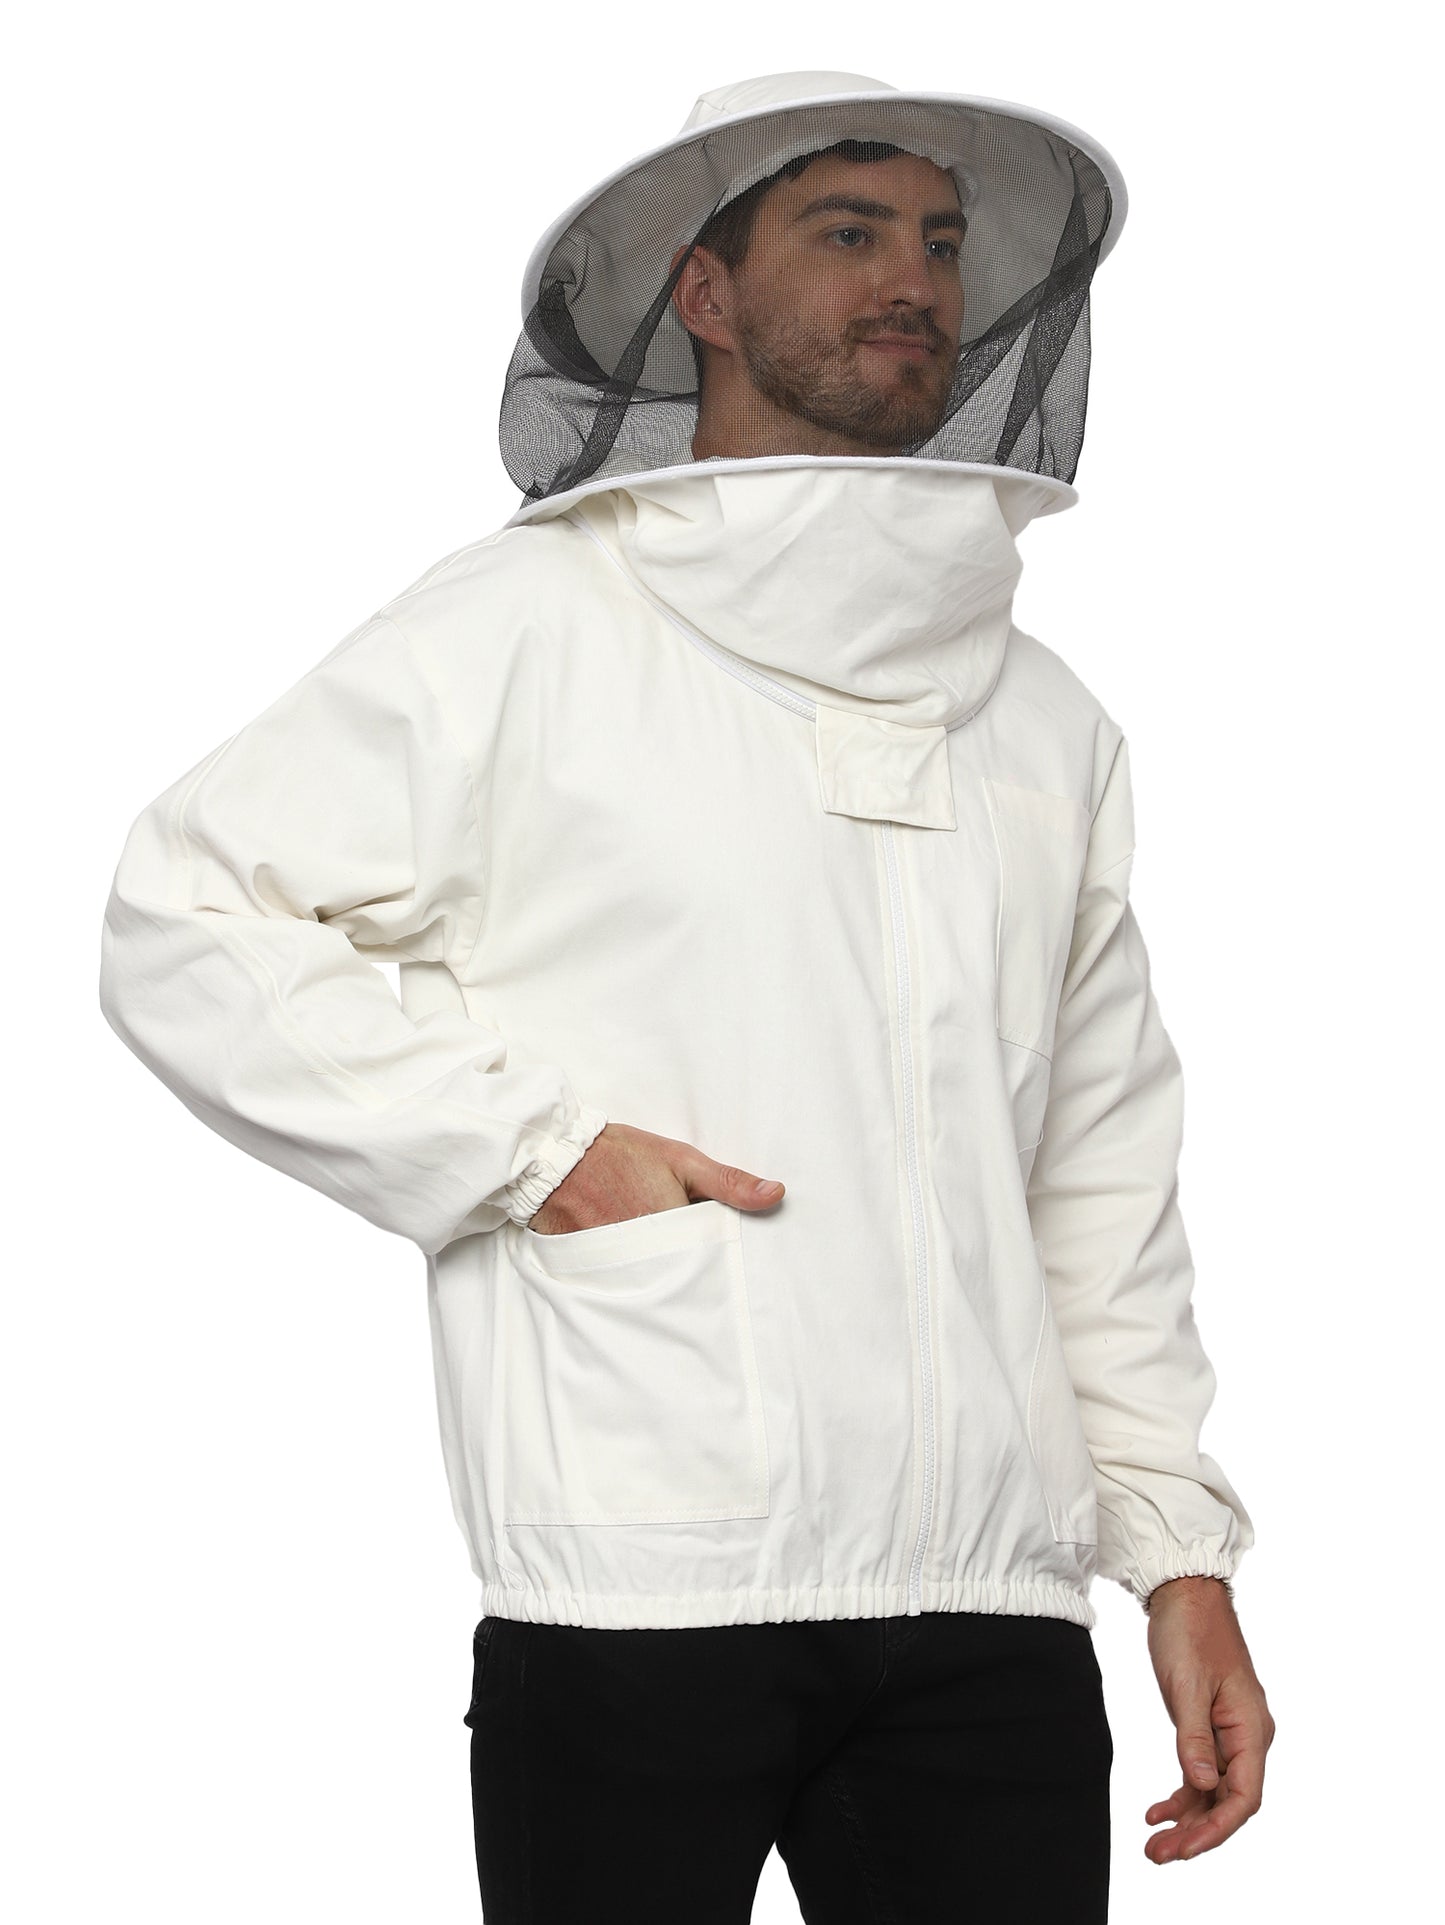 Thick Cotton Sting-Proof Beekeeping Jackets | Beeattire